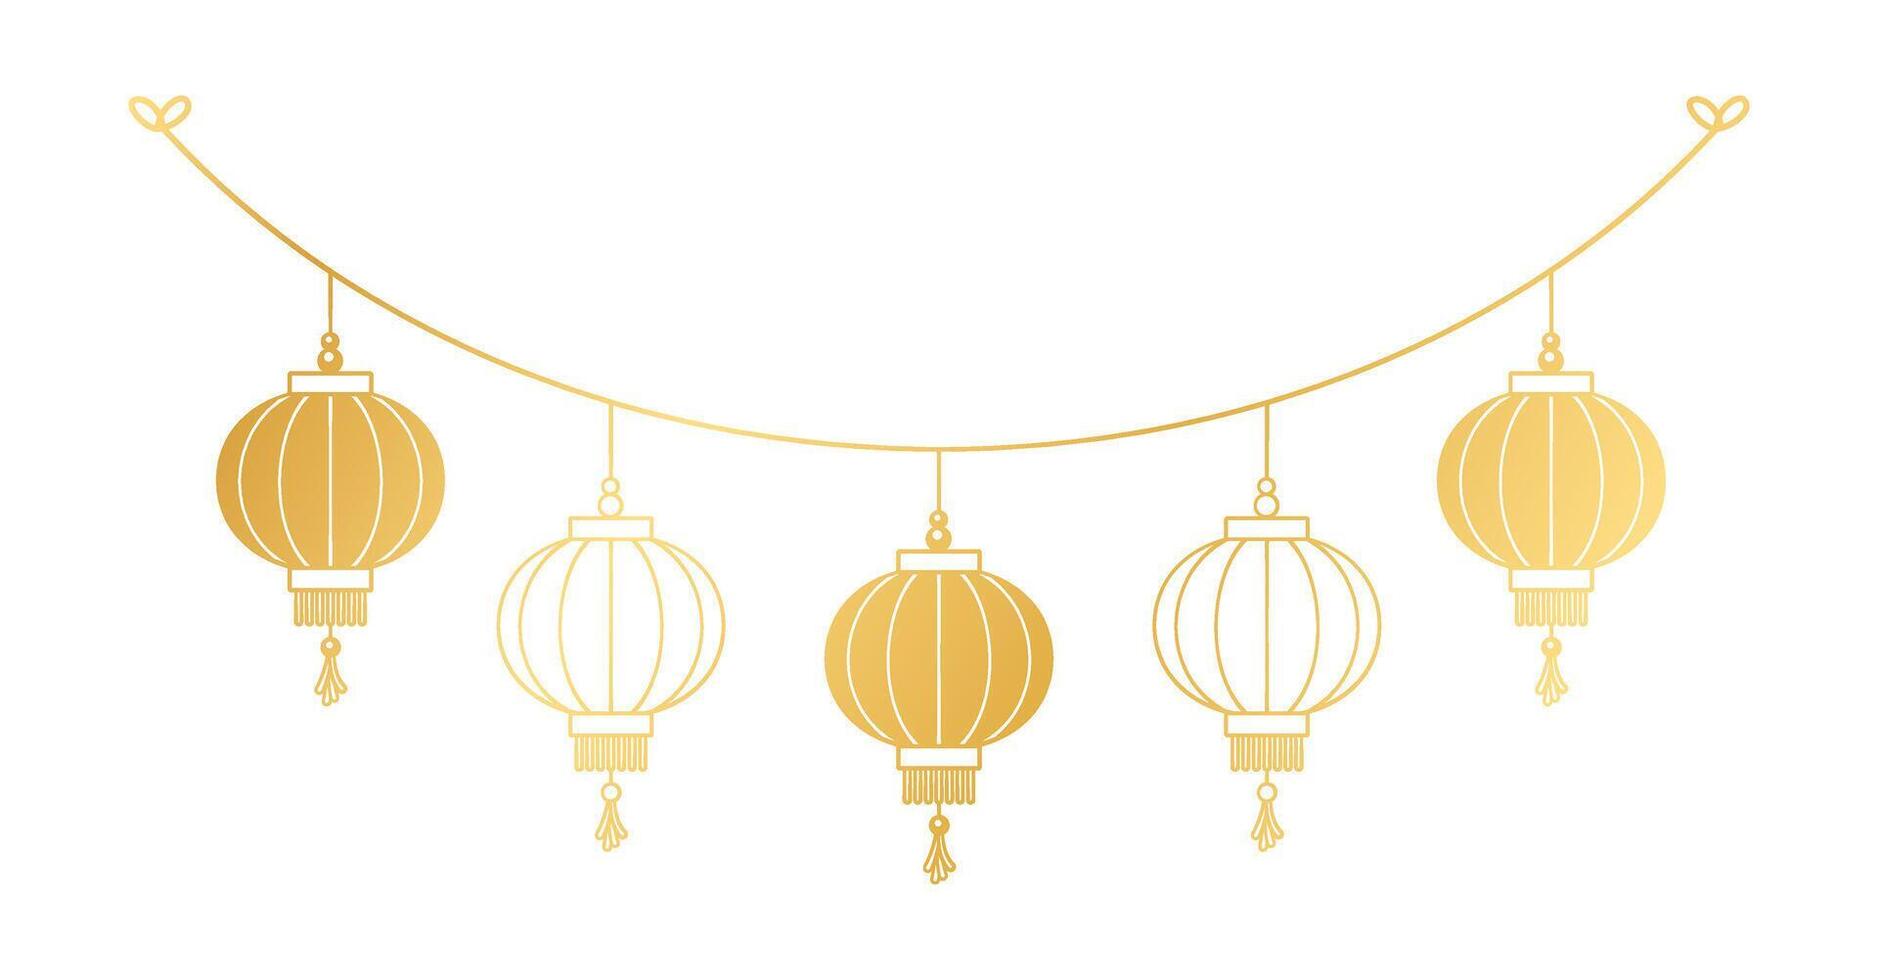 Gold Chinese Lantern Hanging Garland Silhouette, Lunar New Year and Mid-Autumn Festival Decoration Graphic vector